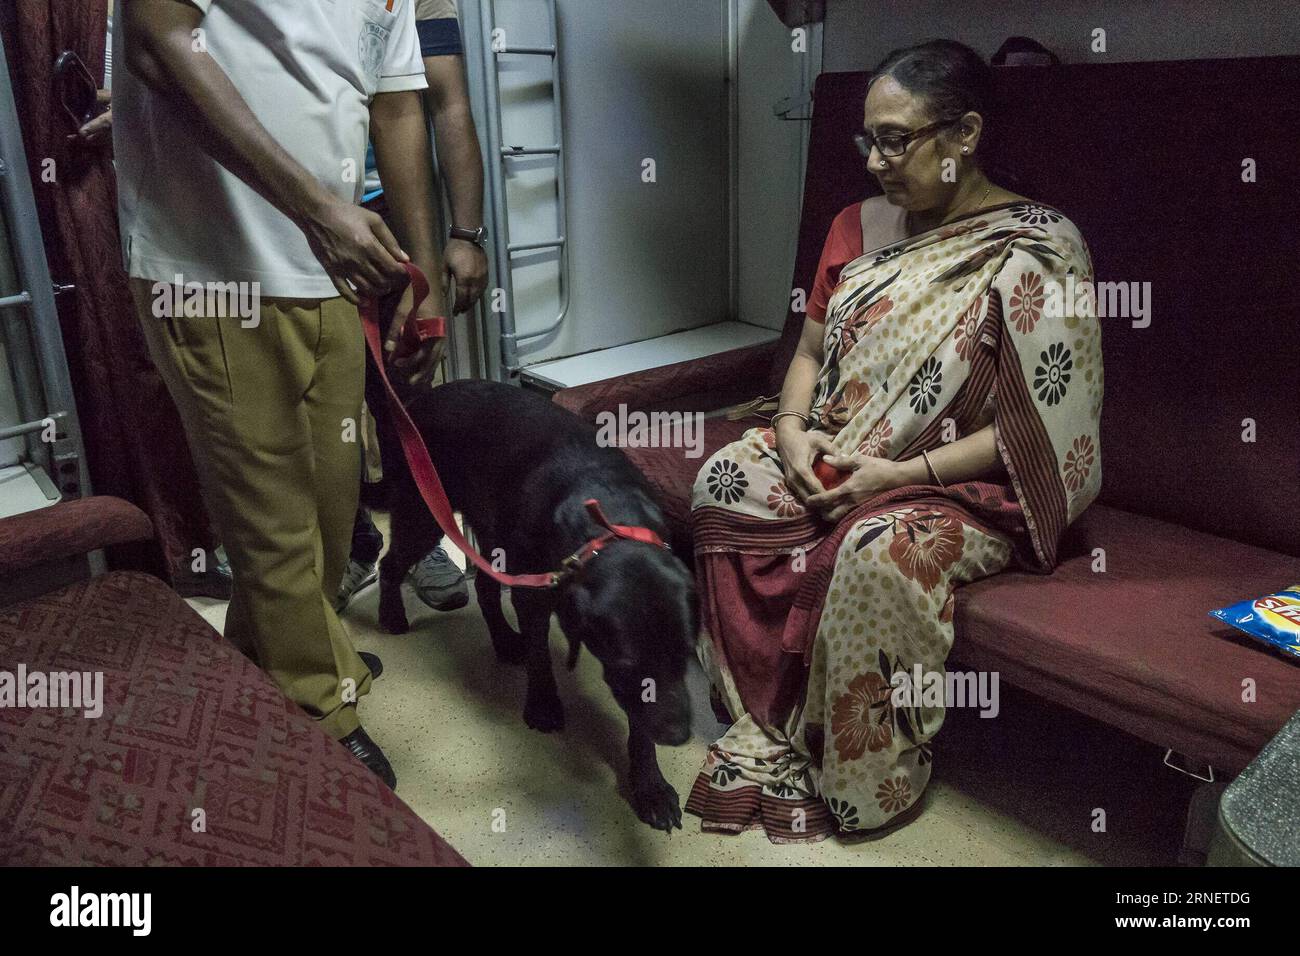 (160703) -- KOLKATA (INDIA), July 3, 2016 -- An Indian security staff checks Rajdhani Express with a sniffer dog at Howrah station in Kolkata, capital of eastern Indian state West Bengal, July 3, 2016. The terror attack at a cafe in the Bangladeshi capital of Dhaka Friday night has created a panic in India s eastern state of West Bengal and some northeast states. International borders with Bangladesh were sealed Saturday by India s Border Security Force (BSF) and several states were put on high alert by Home Ministry. ) (zjy) INDIA-KOLKATA-SECURITY-HIGH ALERT TumpaxMondal PUBLICATIONxNOTxINxCH Stock Photo